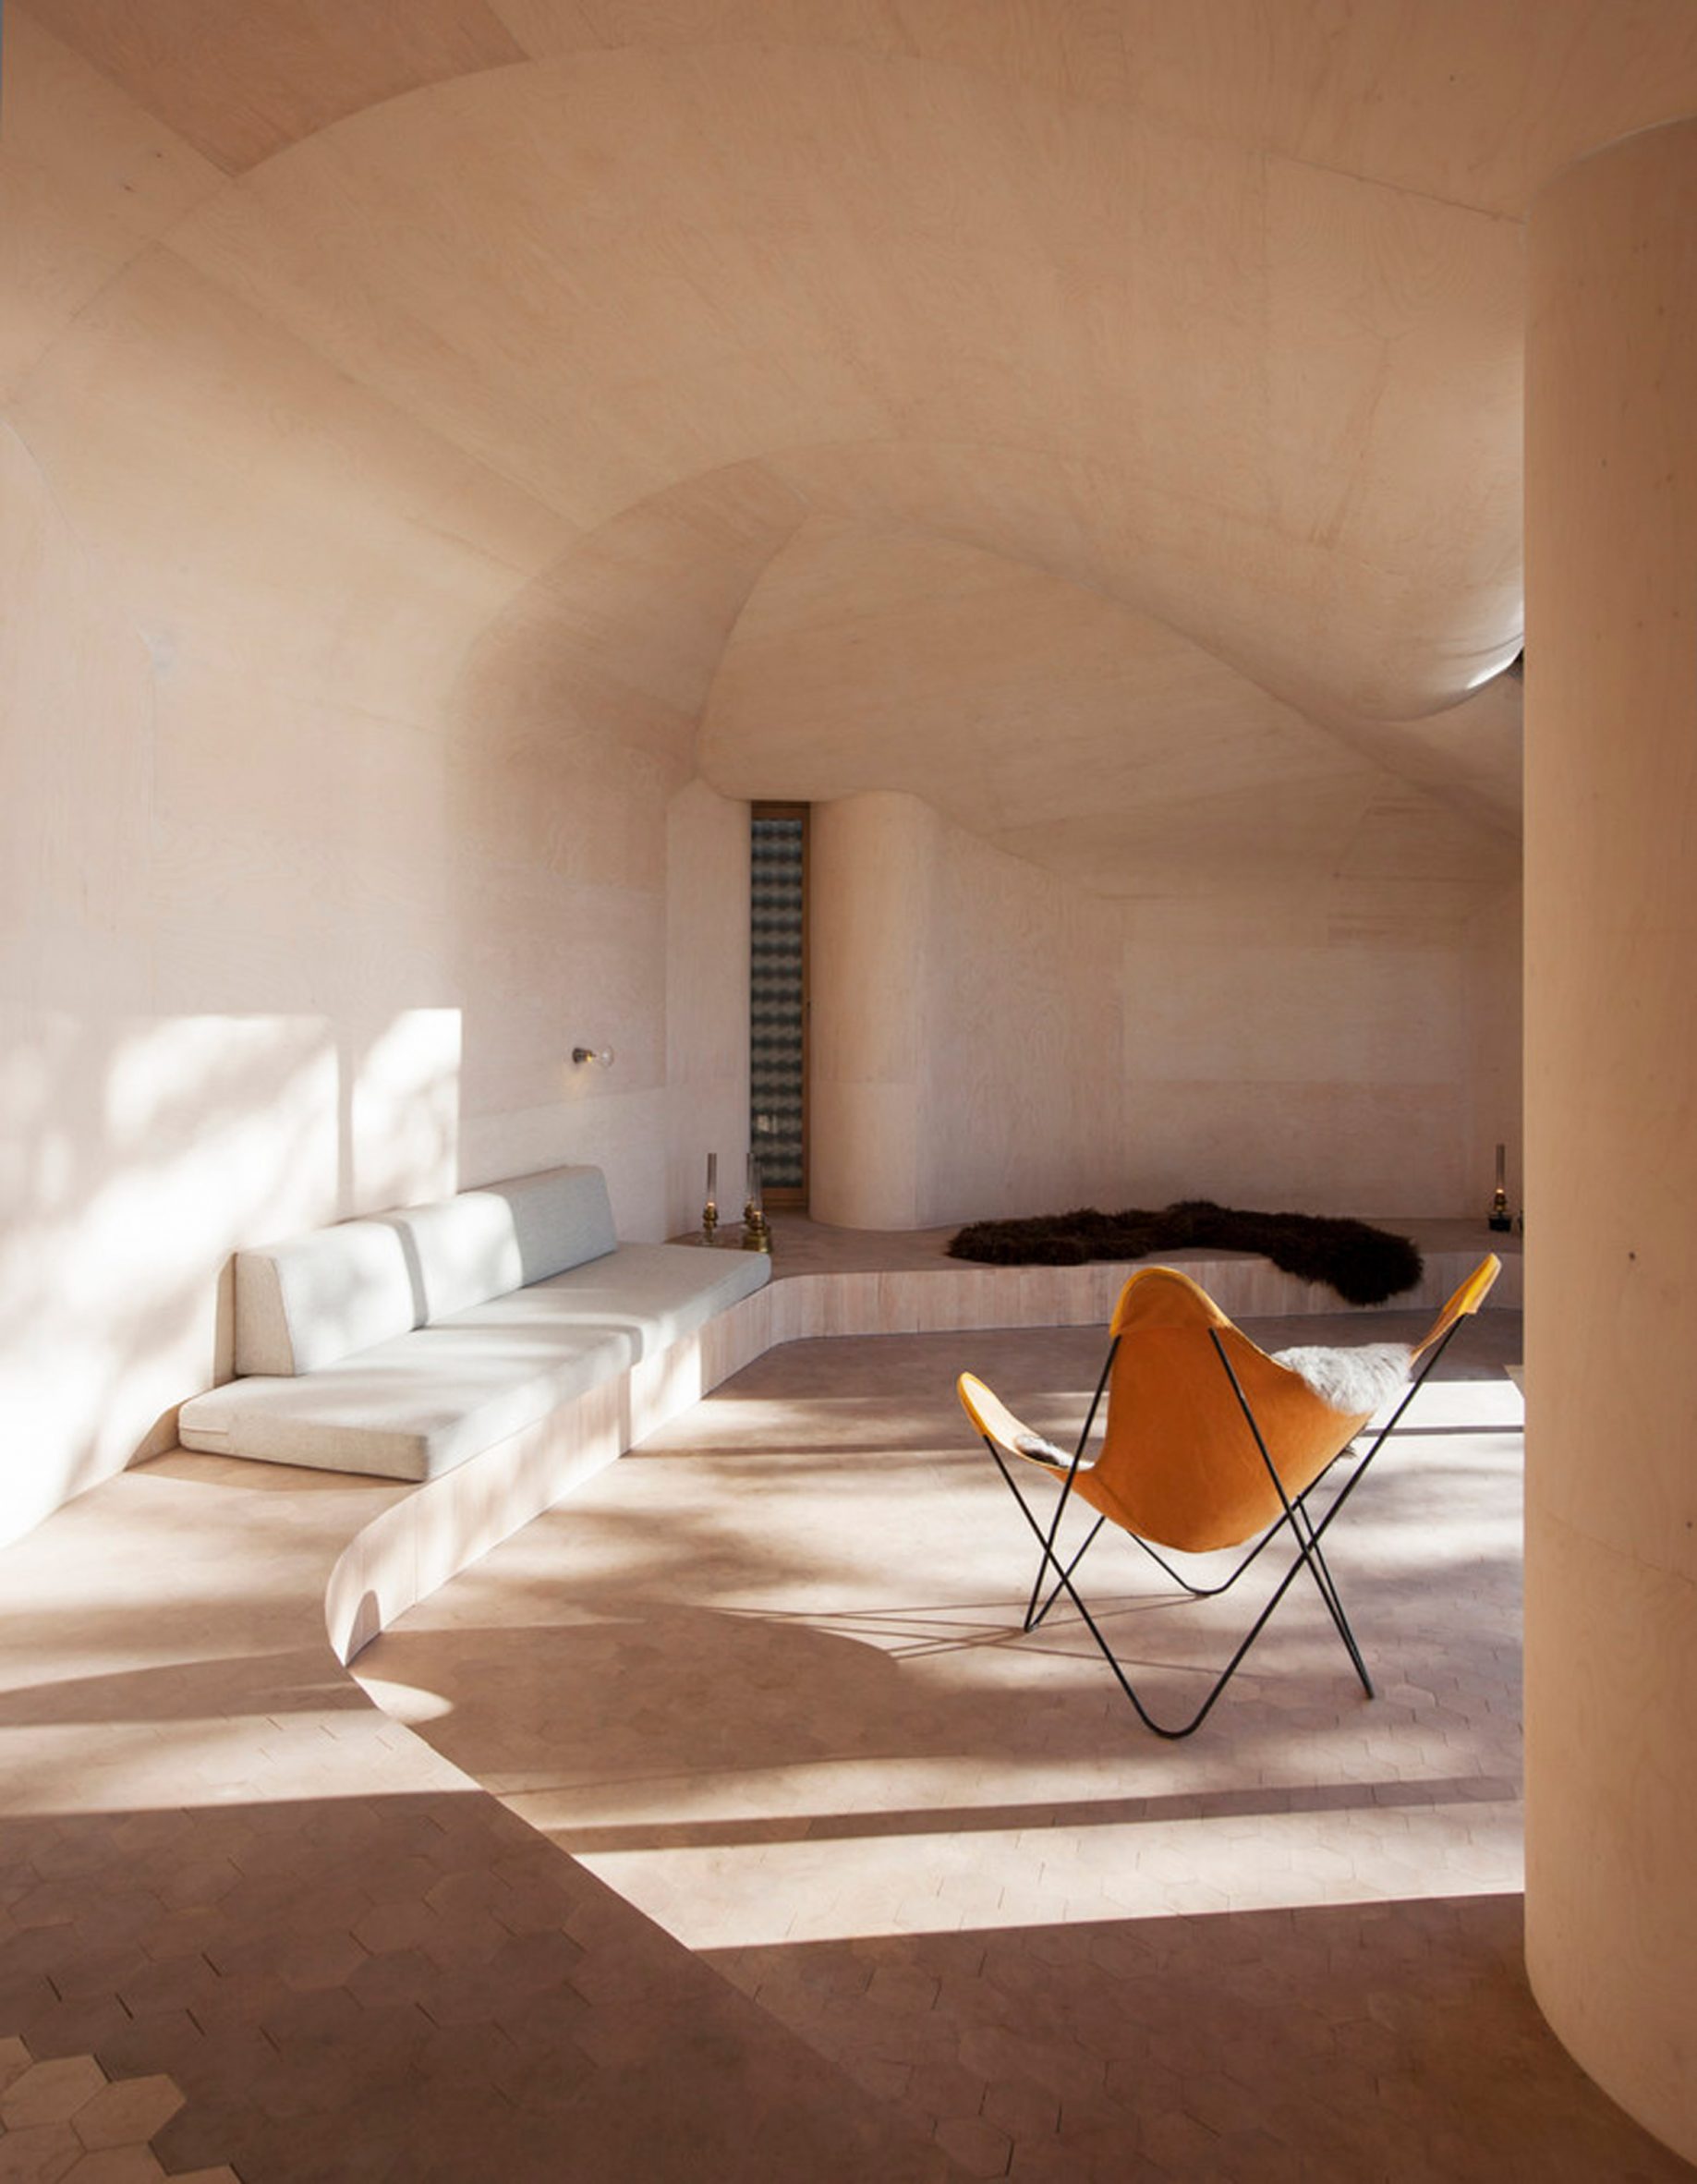 Cave-like interior of Cabin at Norderhov, Norway, by Atelier Oslo